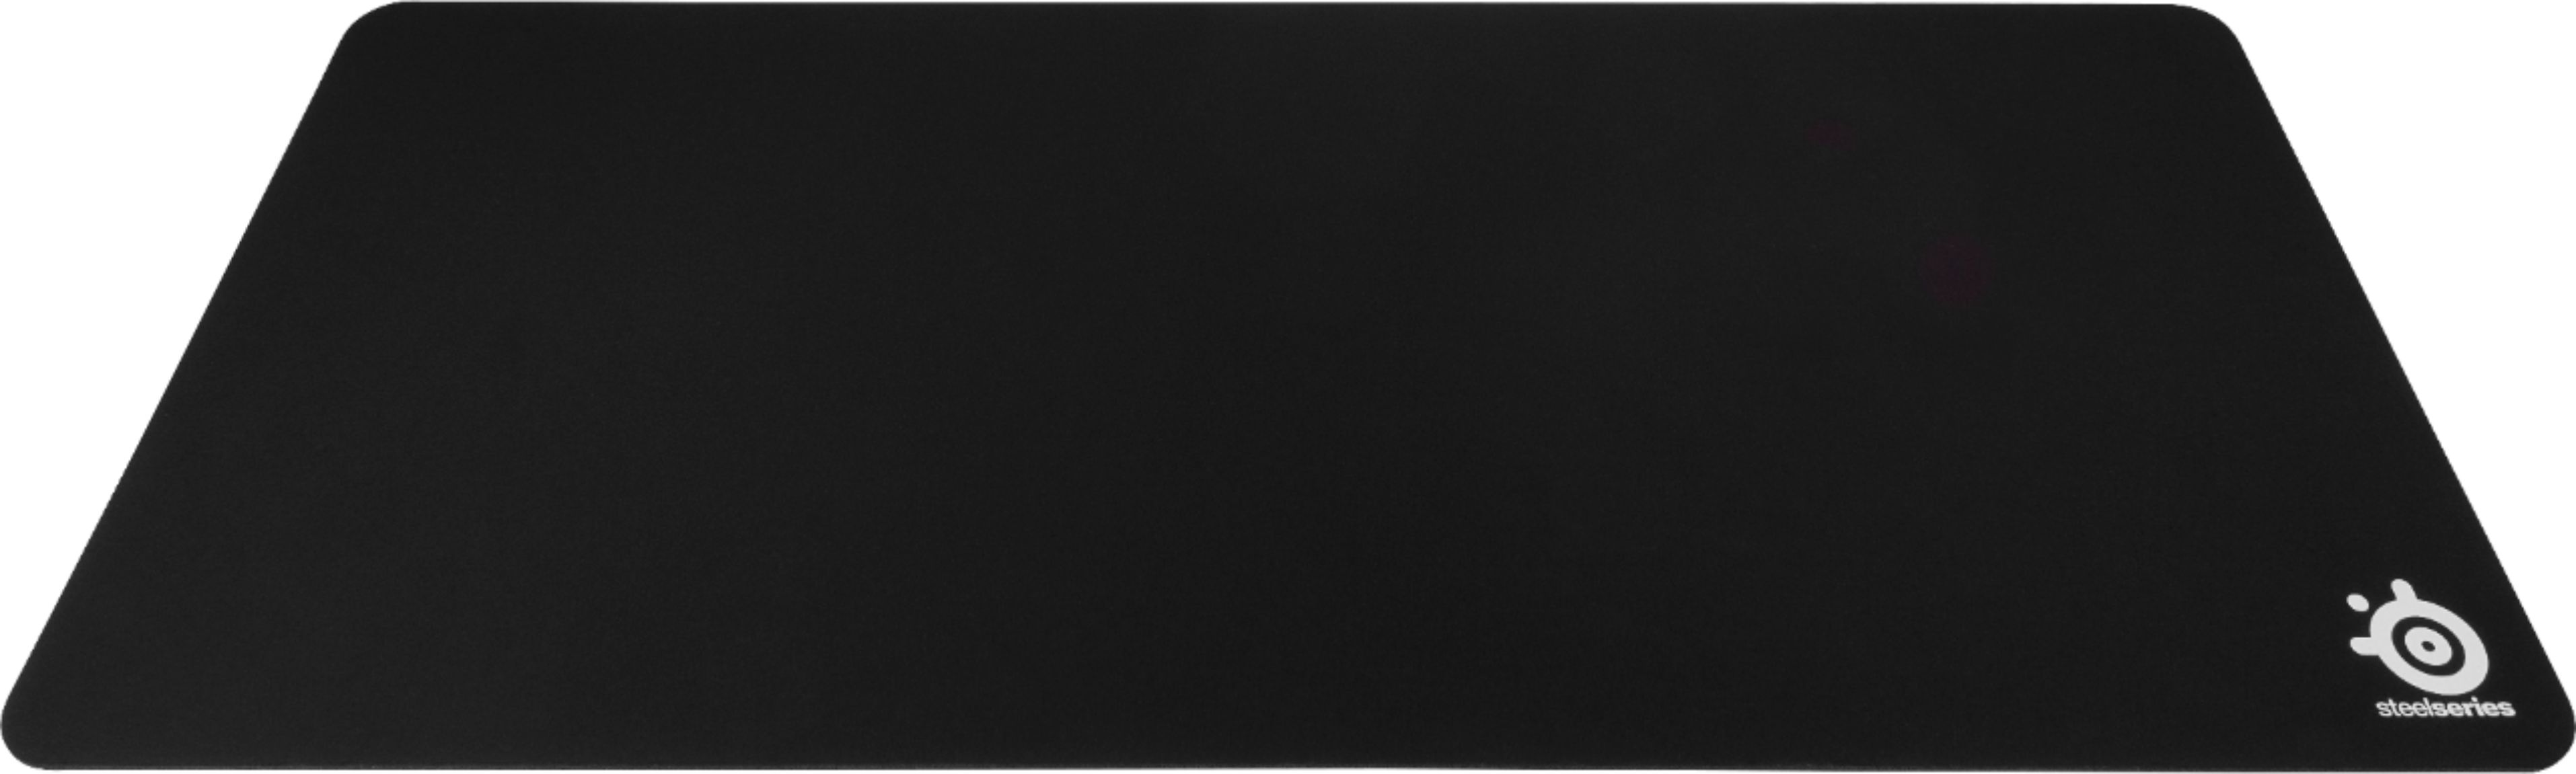 SteelSeries QcK Cloth Gaming Mouse Pad Black 67500 - Buy